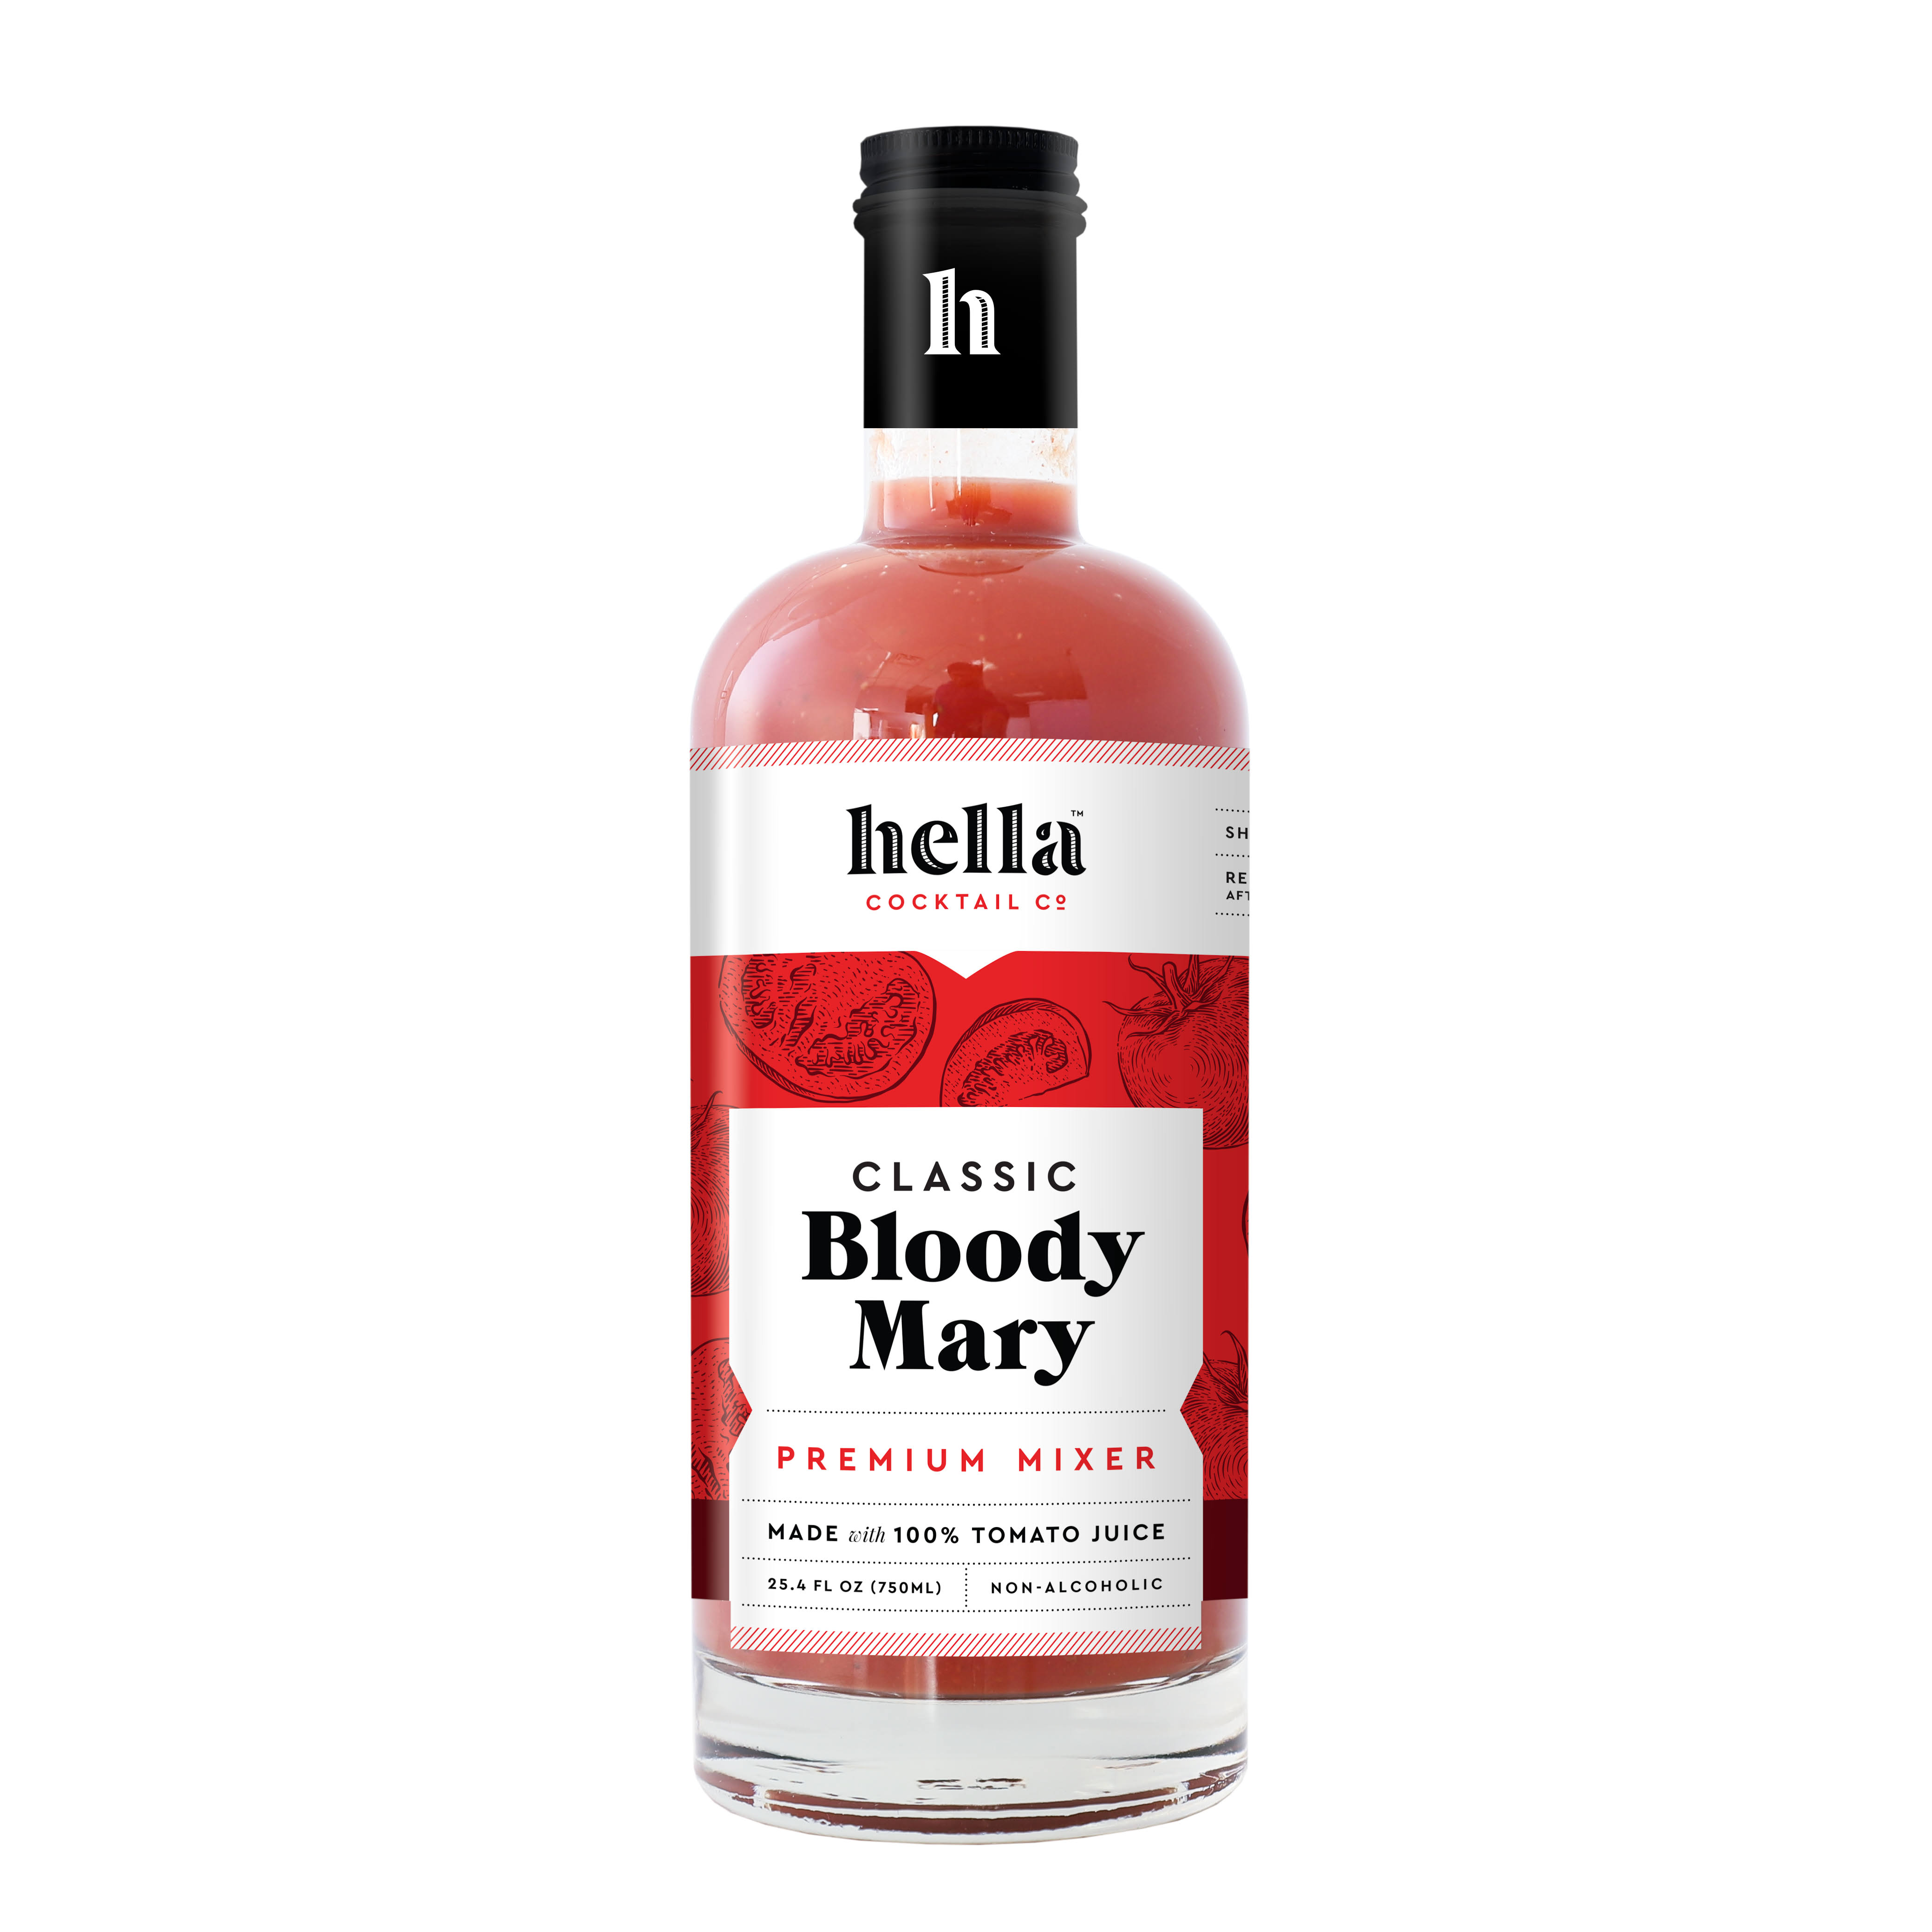 Hella Cocktails Cocktail Mixer, Bloody Mary, Classic - 25.4 fl oz